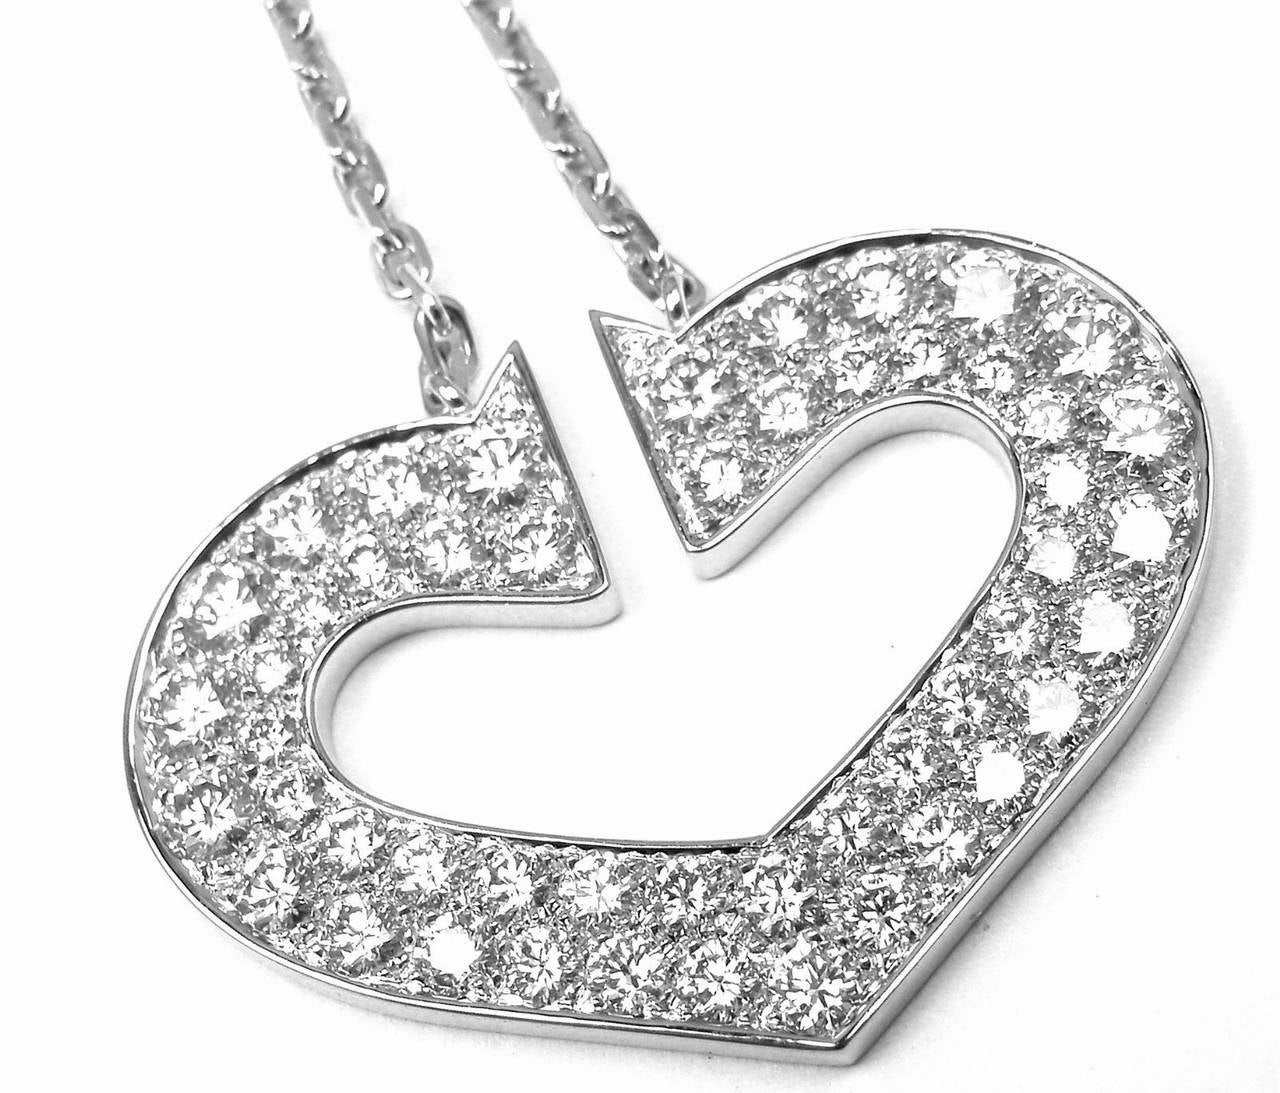 18k White Gold Large Diamond Heart Necklace by Cartier.
With 52 round brilliant cut diamonds VVS1 clarity, E color total weight approx. 2ct

This necklace comes with original Cartier box & Cartier paper.

Retail Price: $18,500 plus